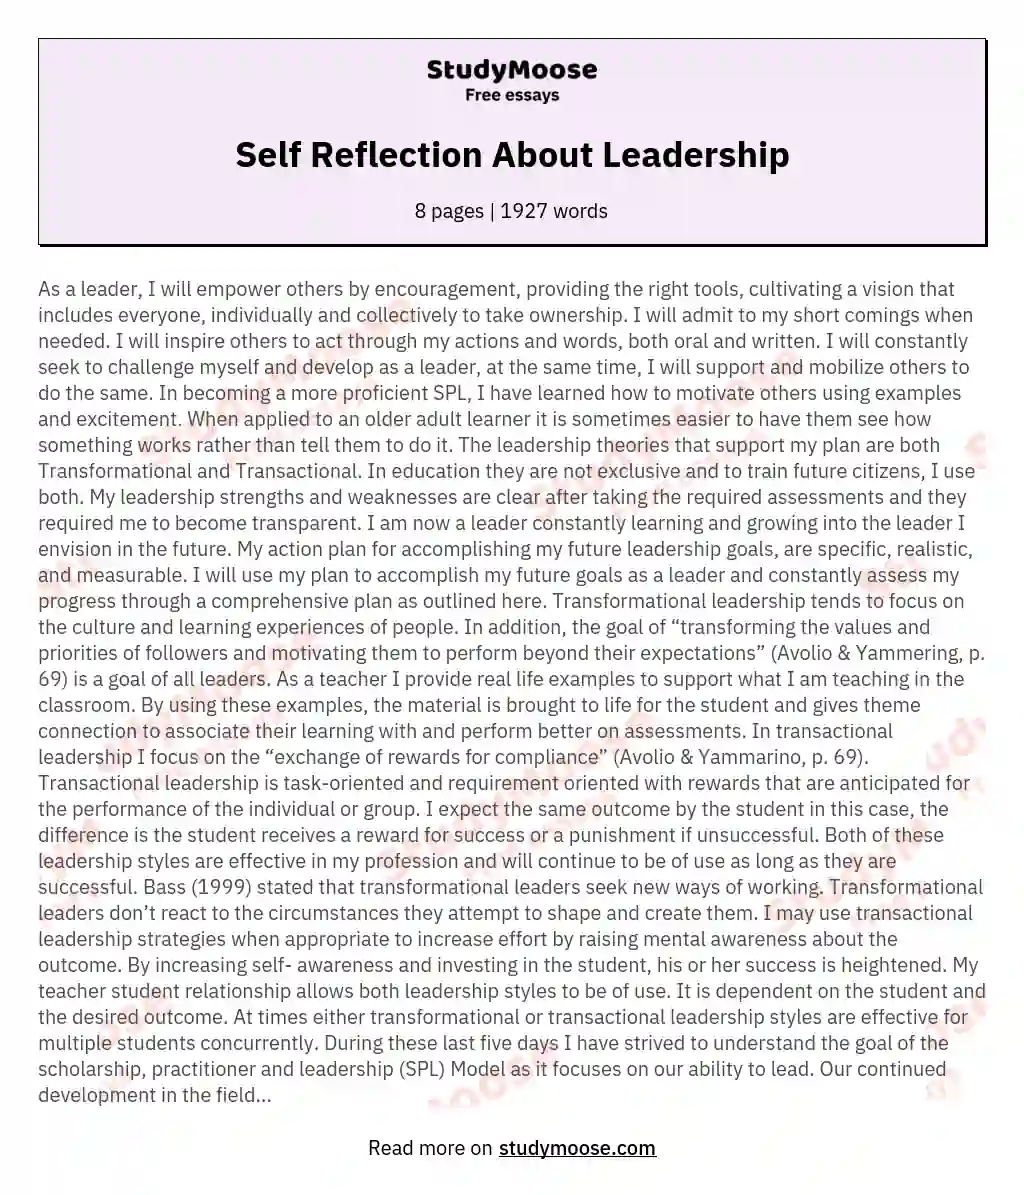 Self Reflection About Leadership essay